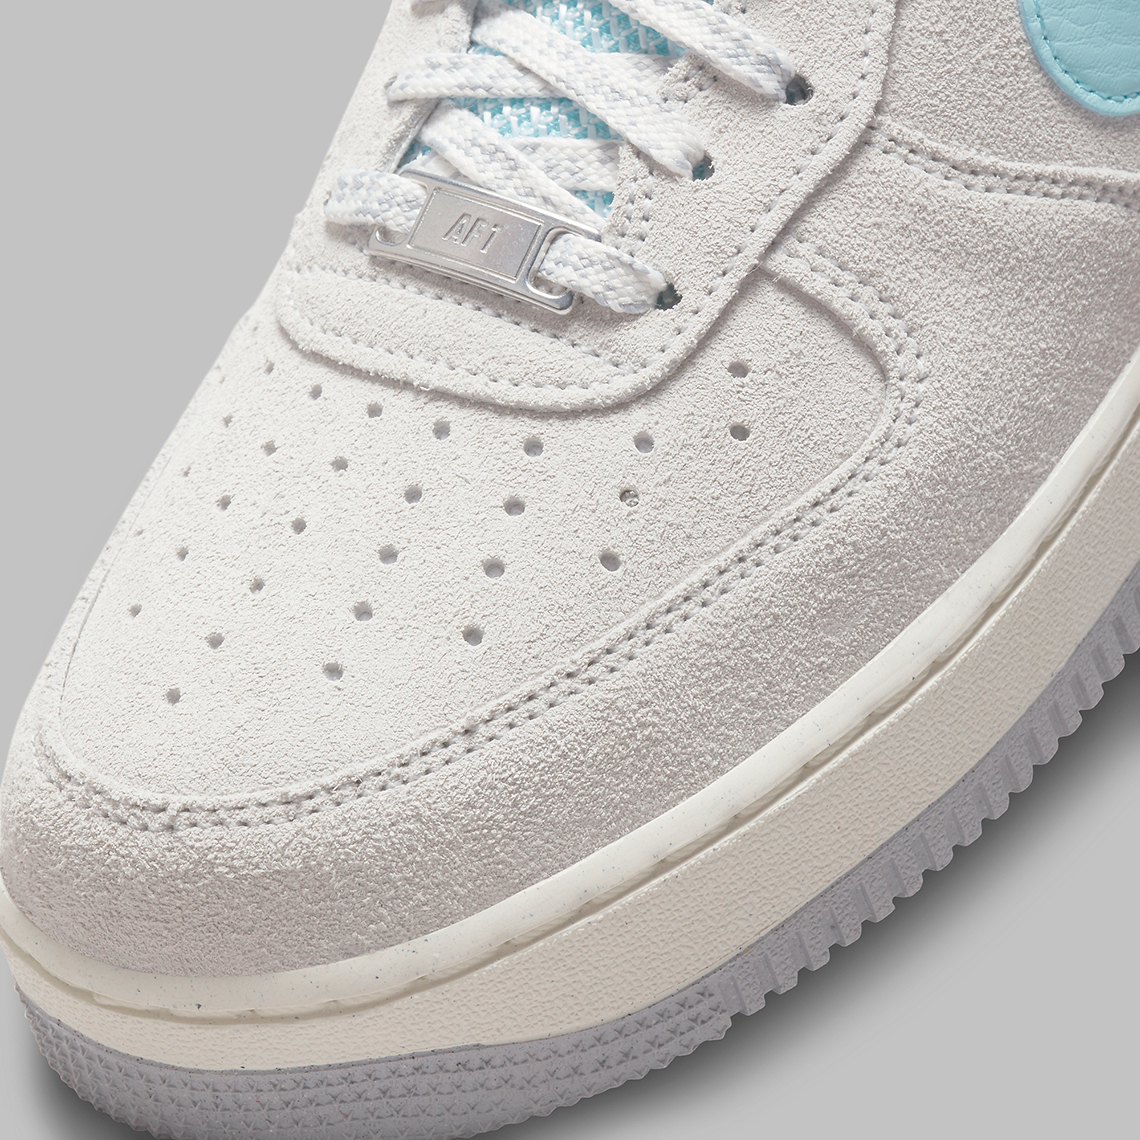 Nike Air Force 1 Low Snowflake Dq0790 001 Release Date 3